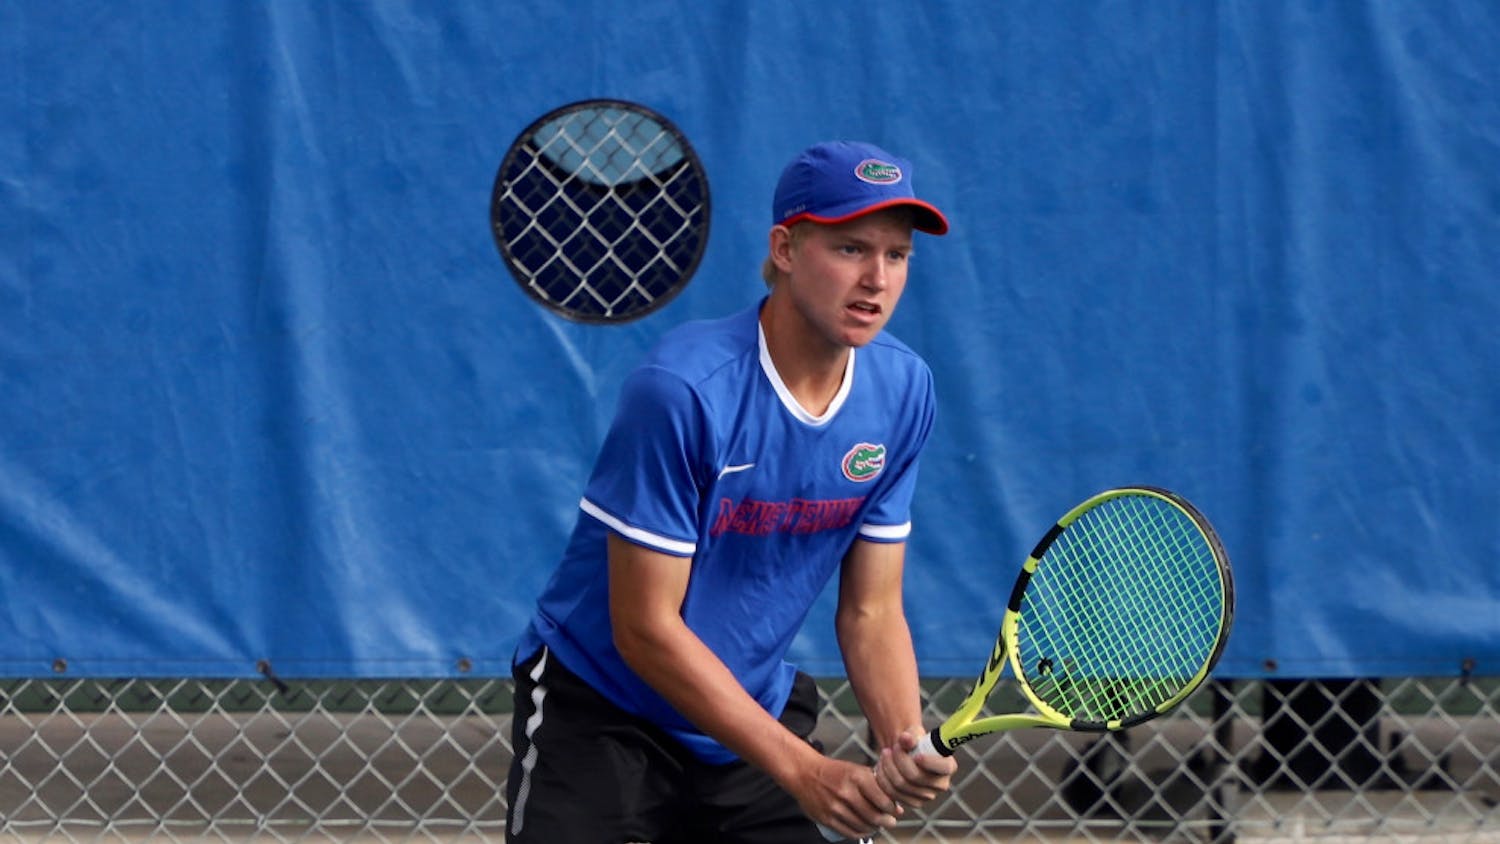 Junior Lukas Greif left the Southern Intercollegiate Championships undefeated, having won all five of his matches.